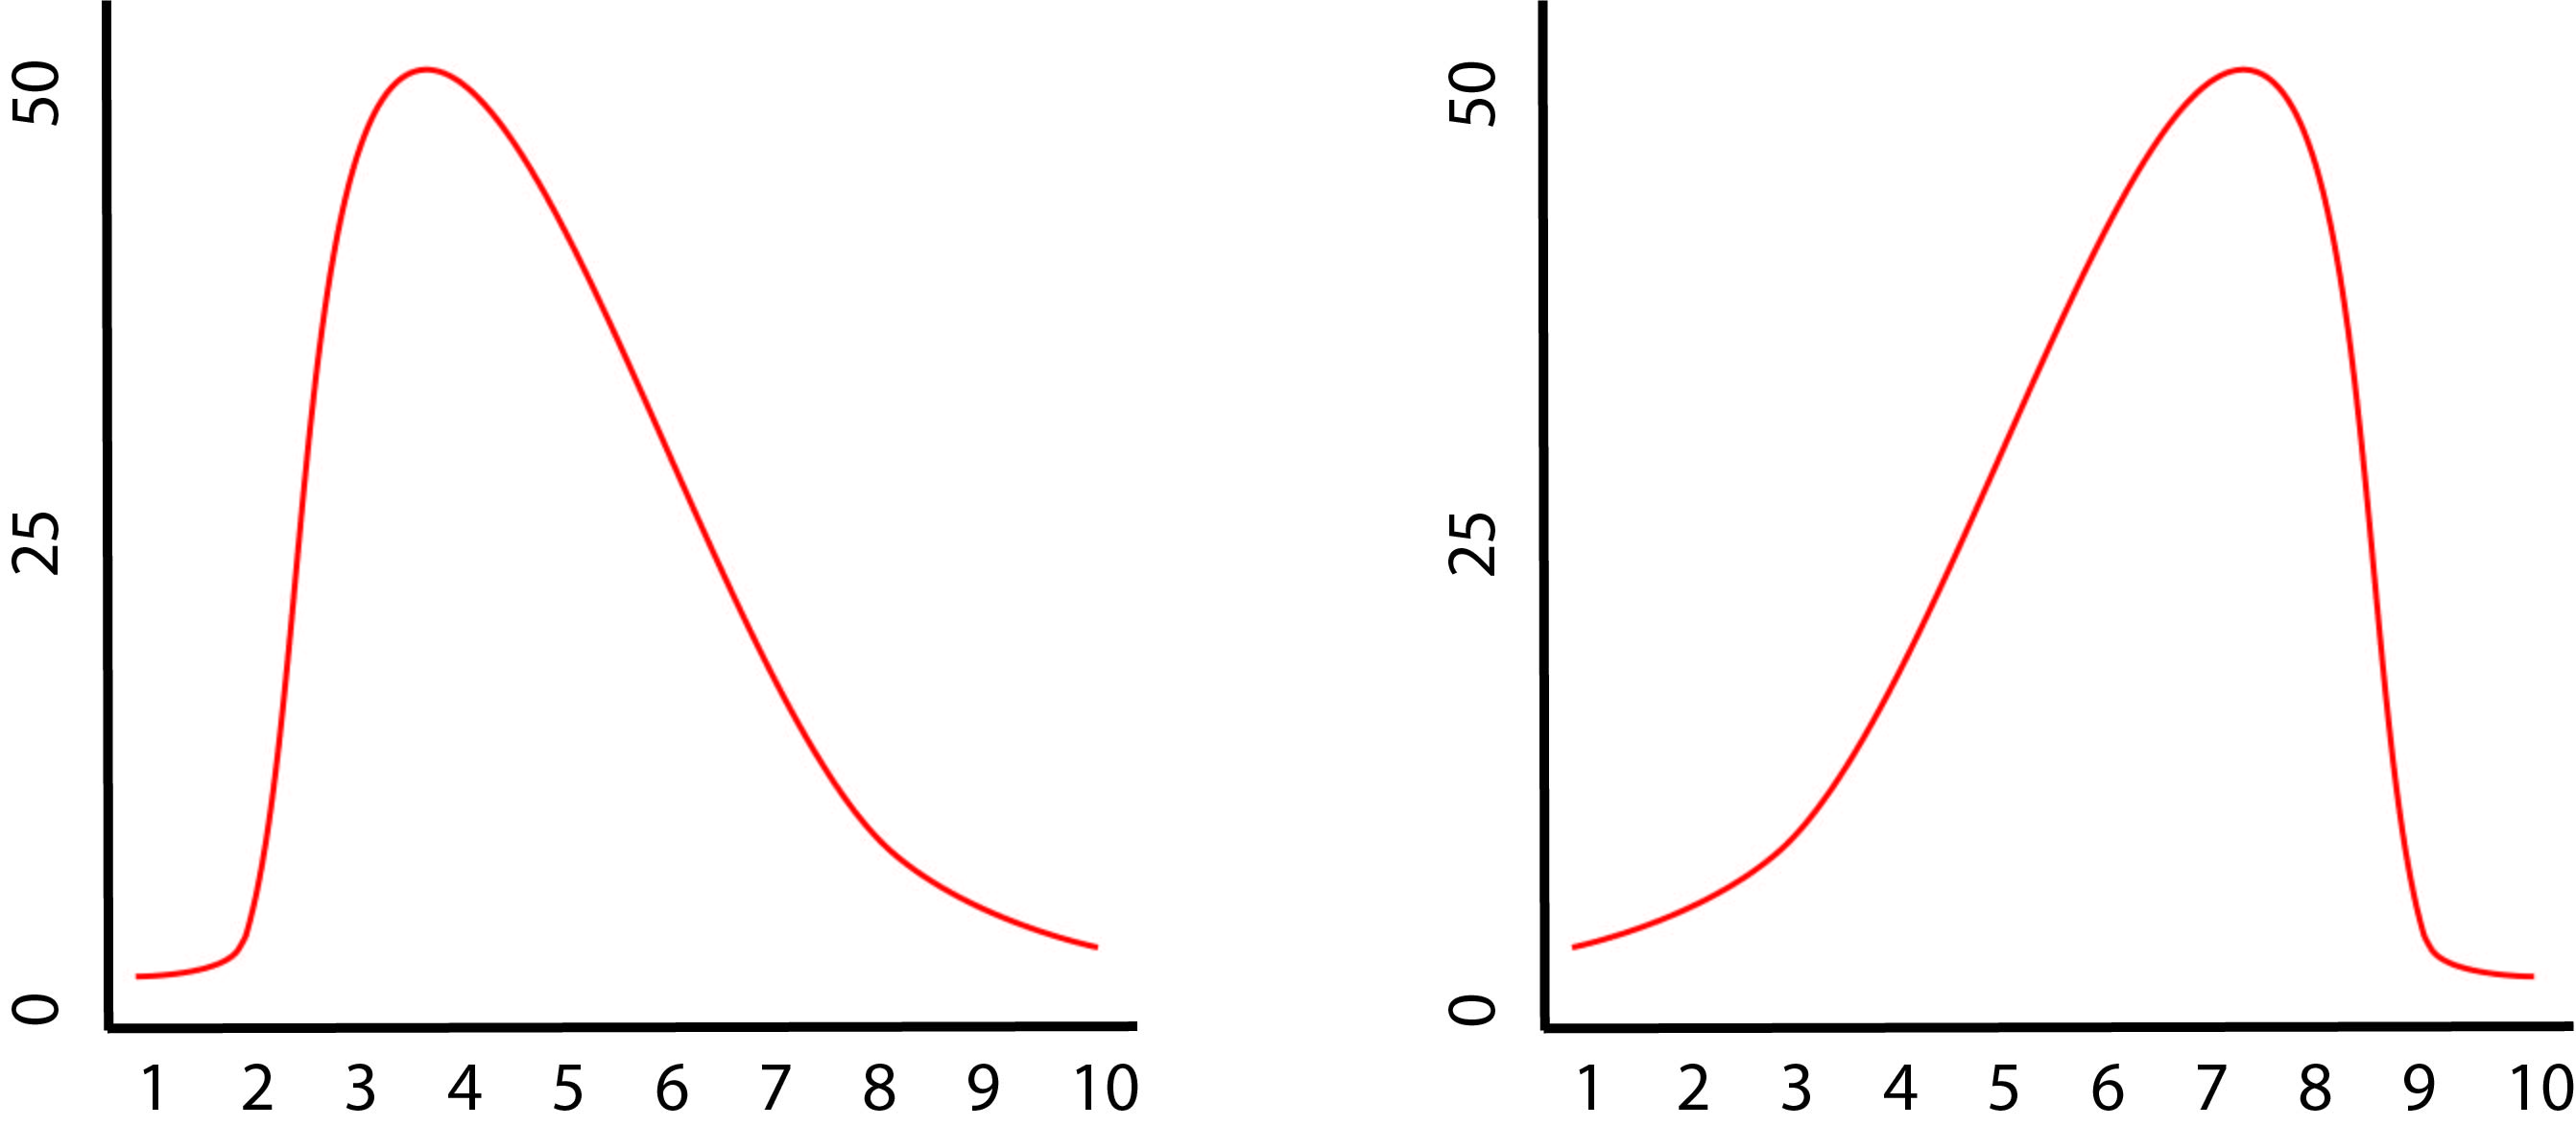 Standard deviation works only with a bell curve, if the curve is skewed it will not work